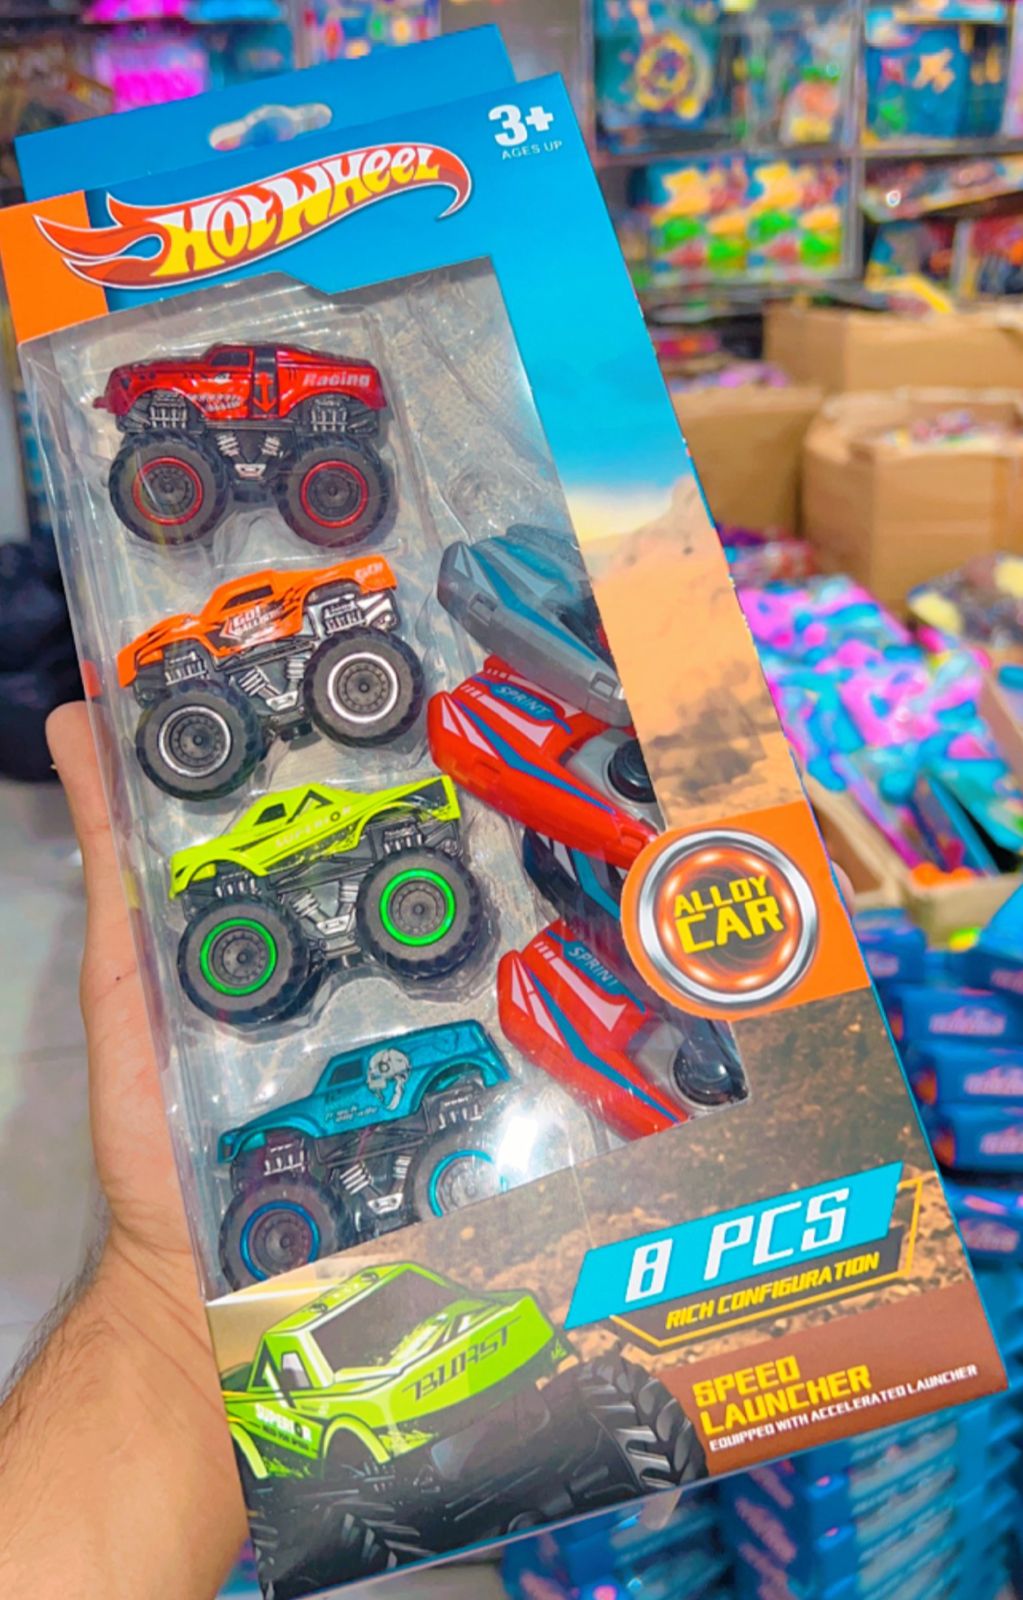 Hot Wheels Jeep 8 PC Car Set With a Start Key (for kids)